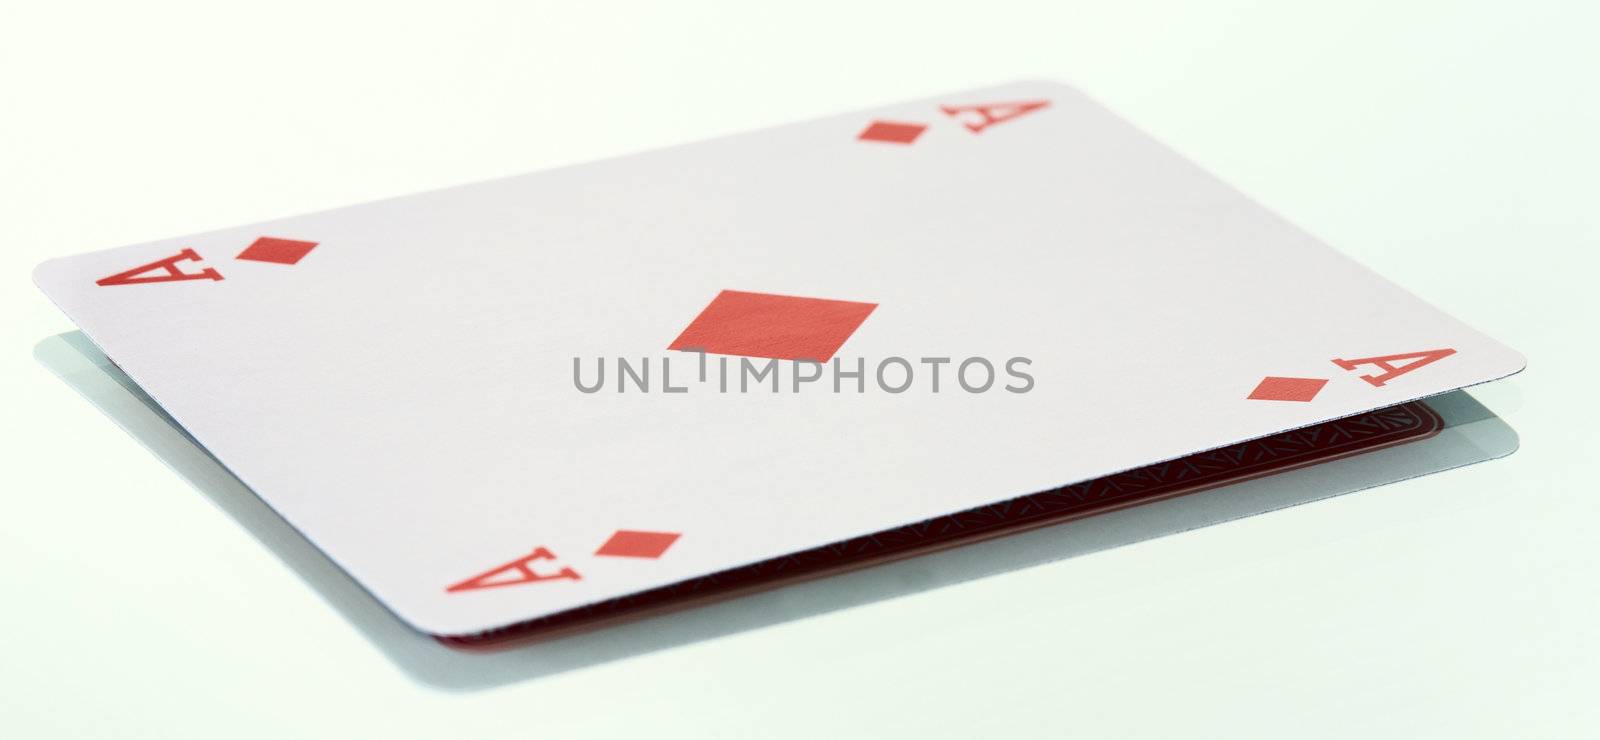 The ace of diamonds on the smooth surface background